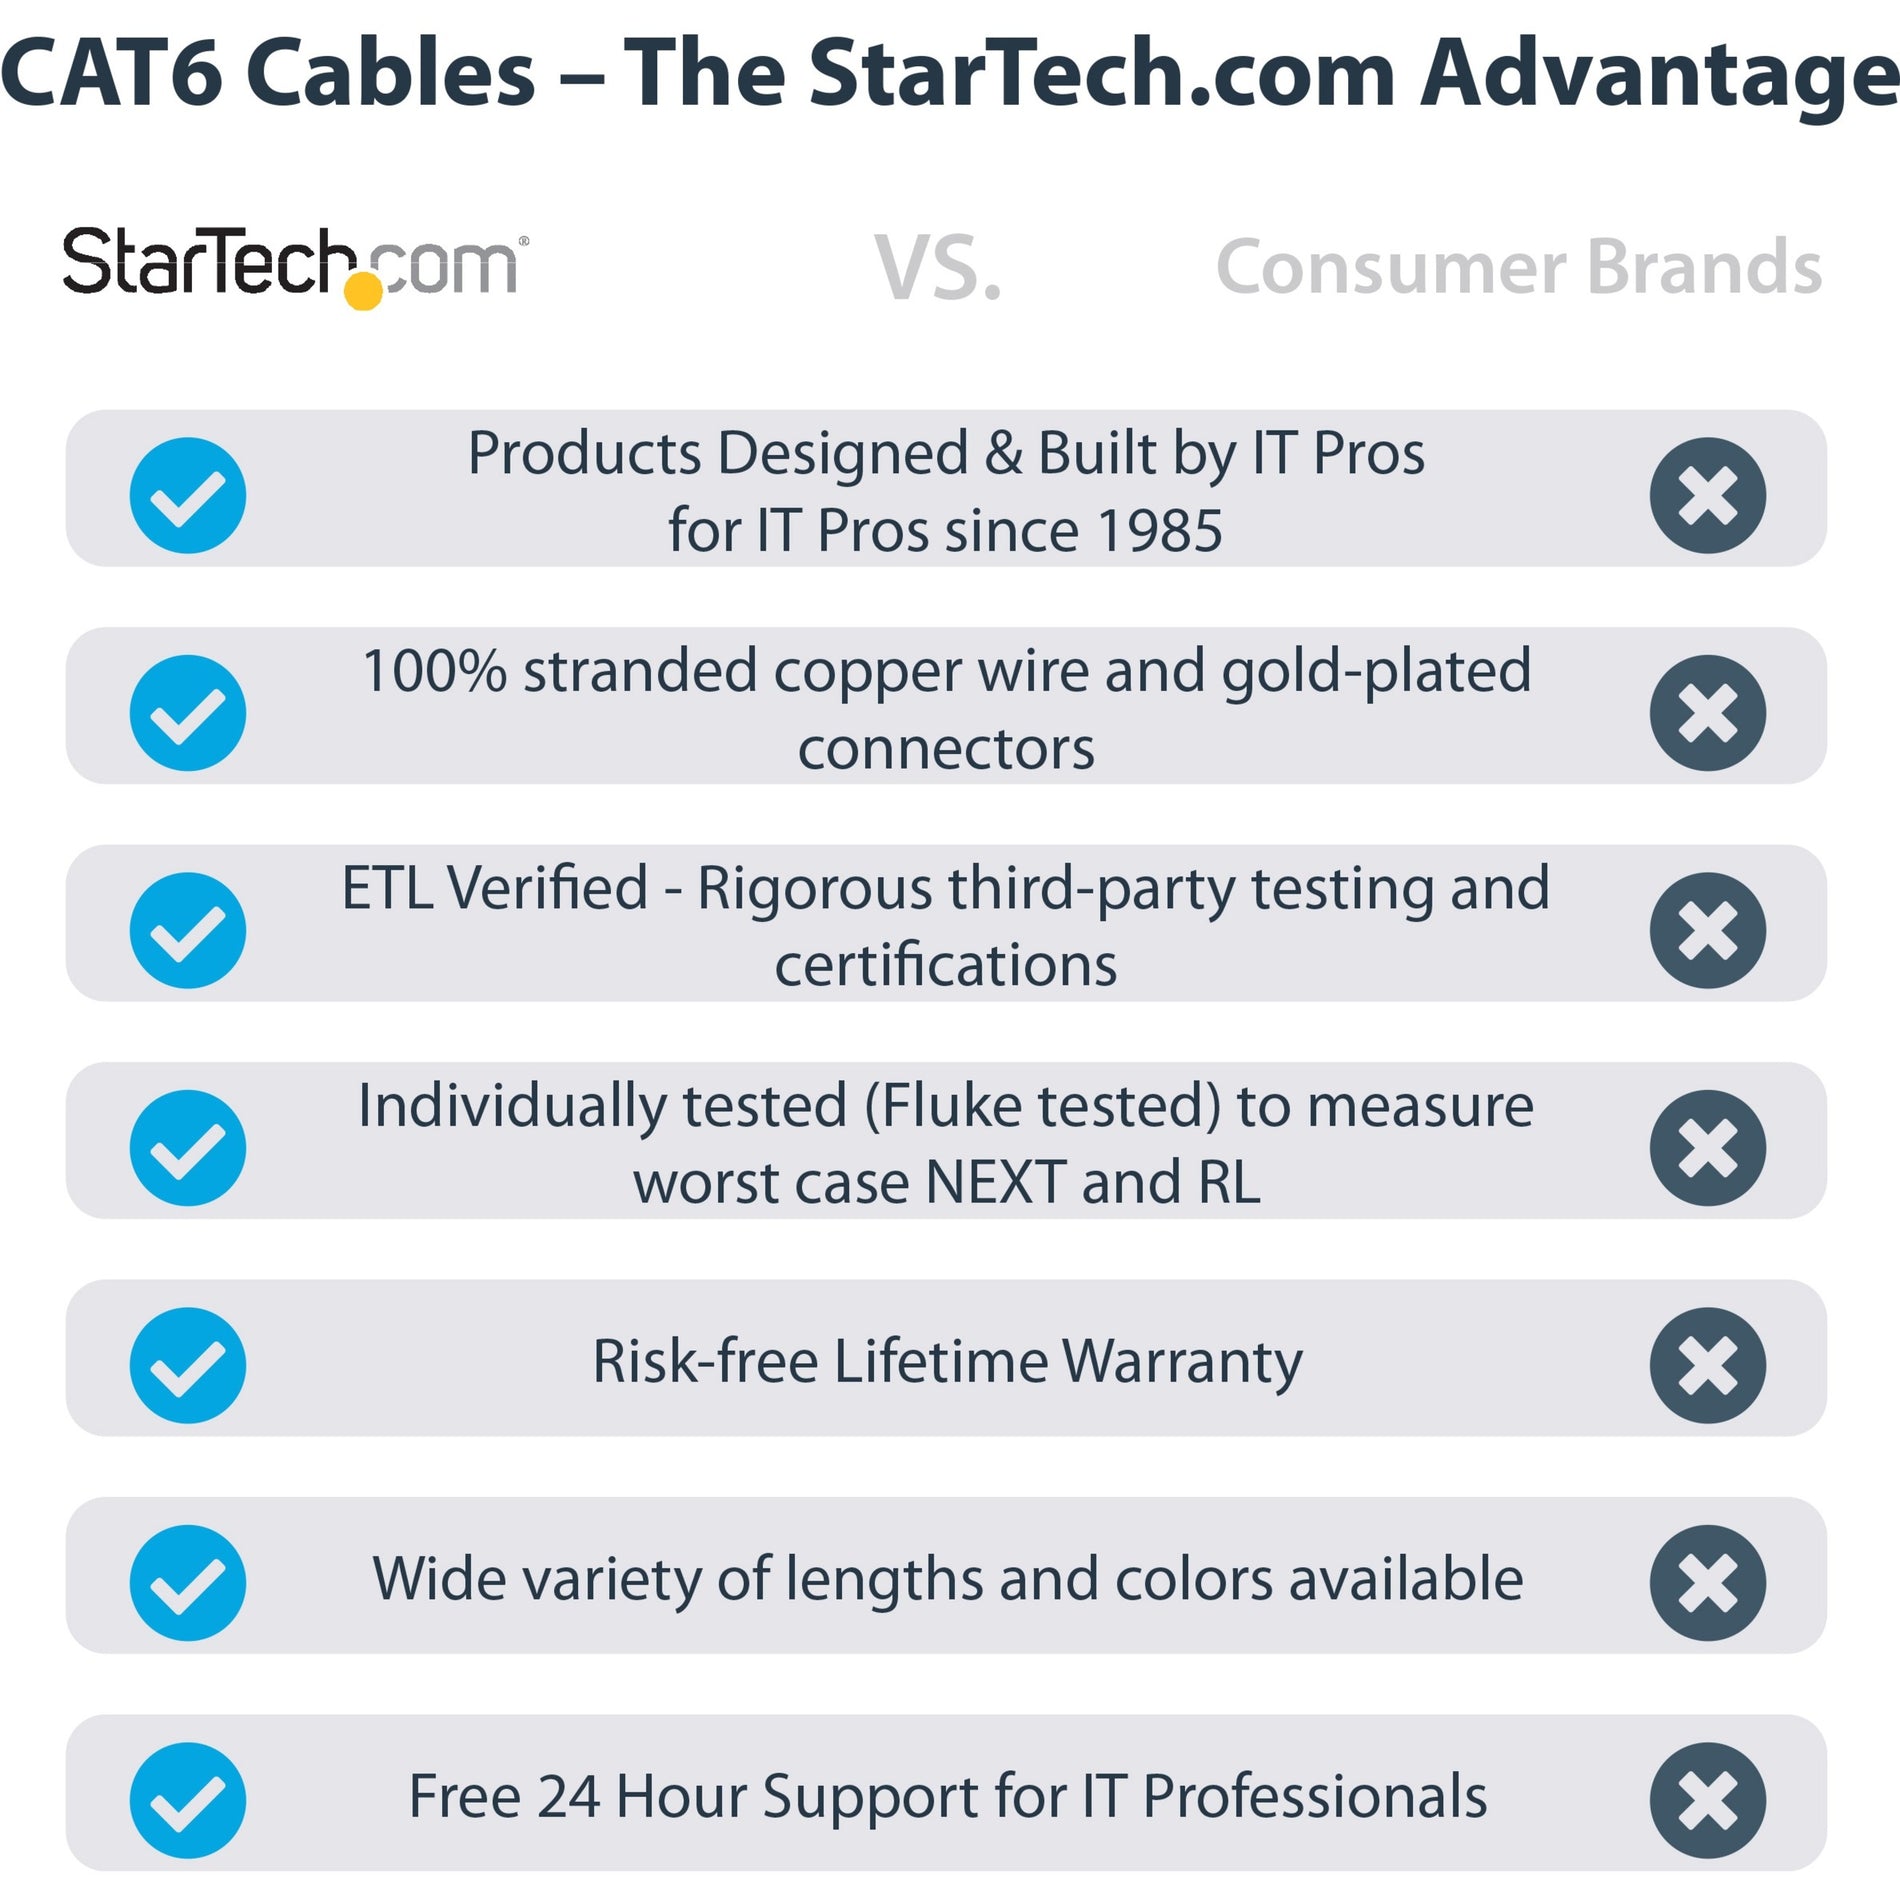 StarTech.com N6PATCH35BL 35 ft Blue Snagless Cat6 UTP Patch Cable, 10 Gbit/s Data Transfer Rate, Gold Plated Connectors